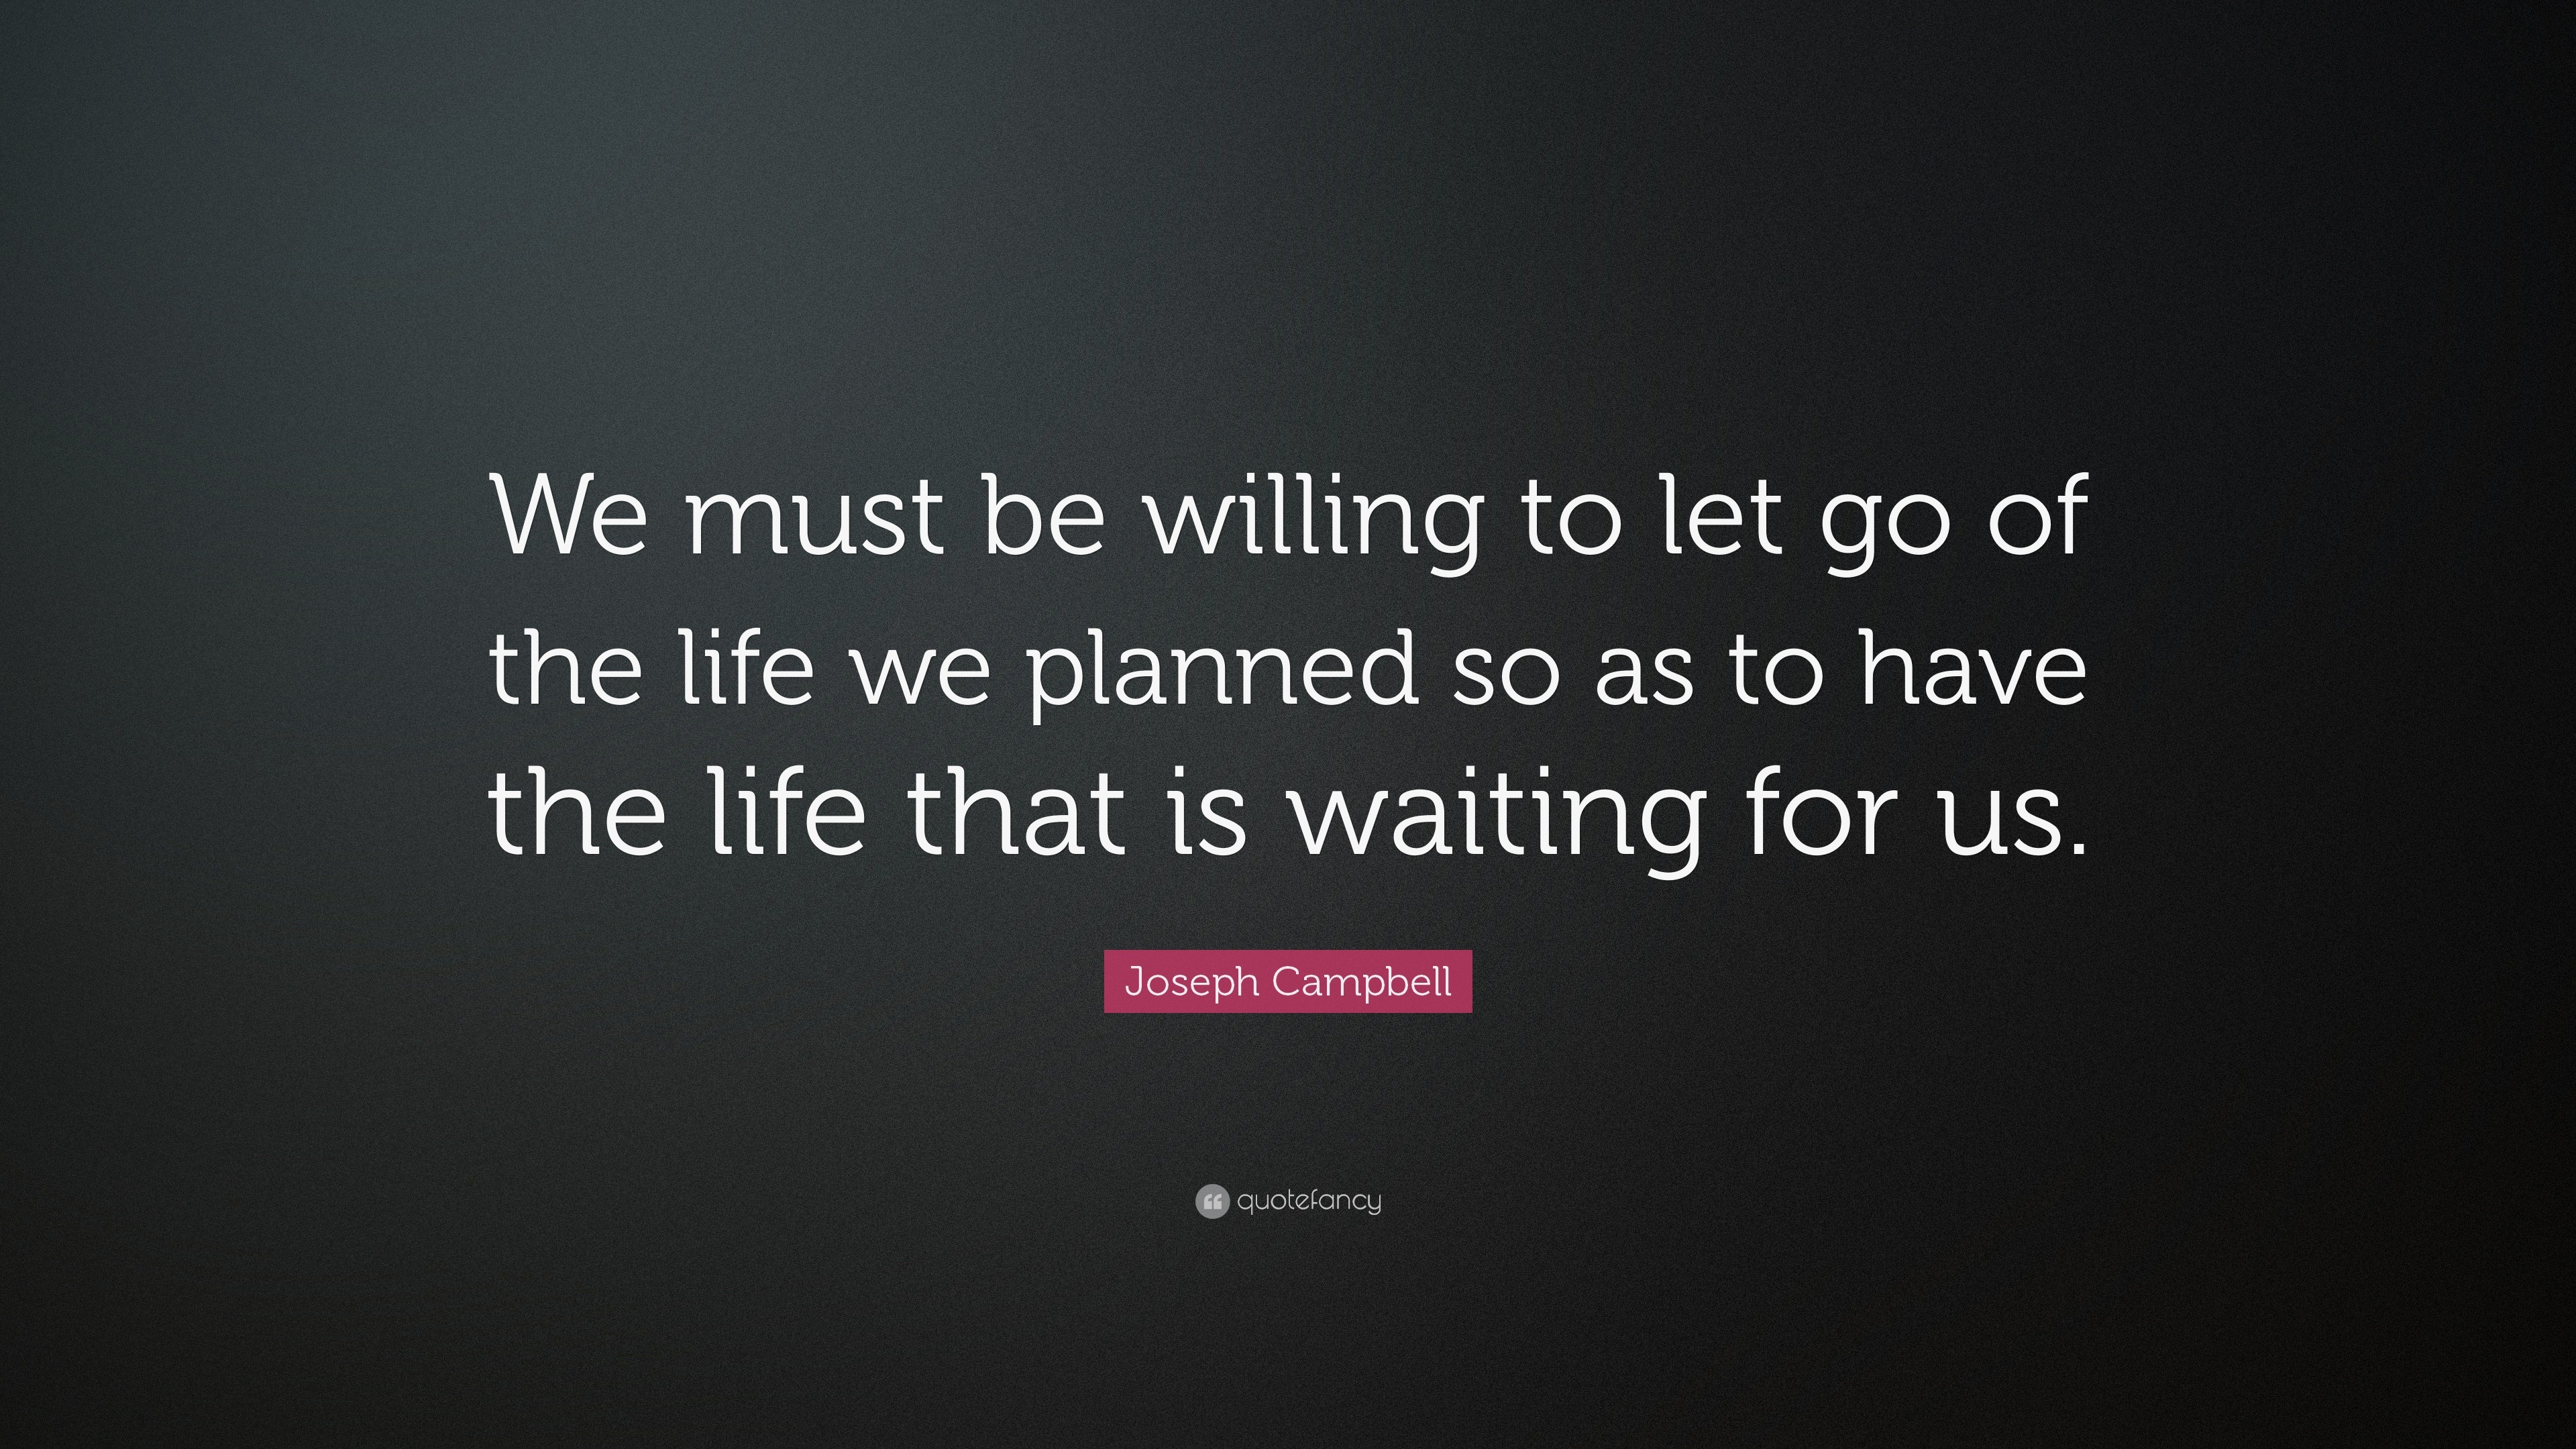 24638 Joseph Campbell Quote We must be willing to let go of the life we